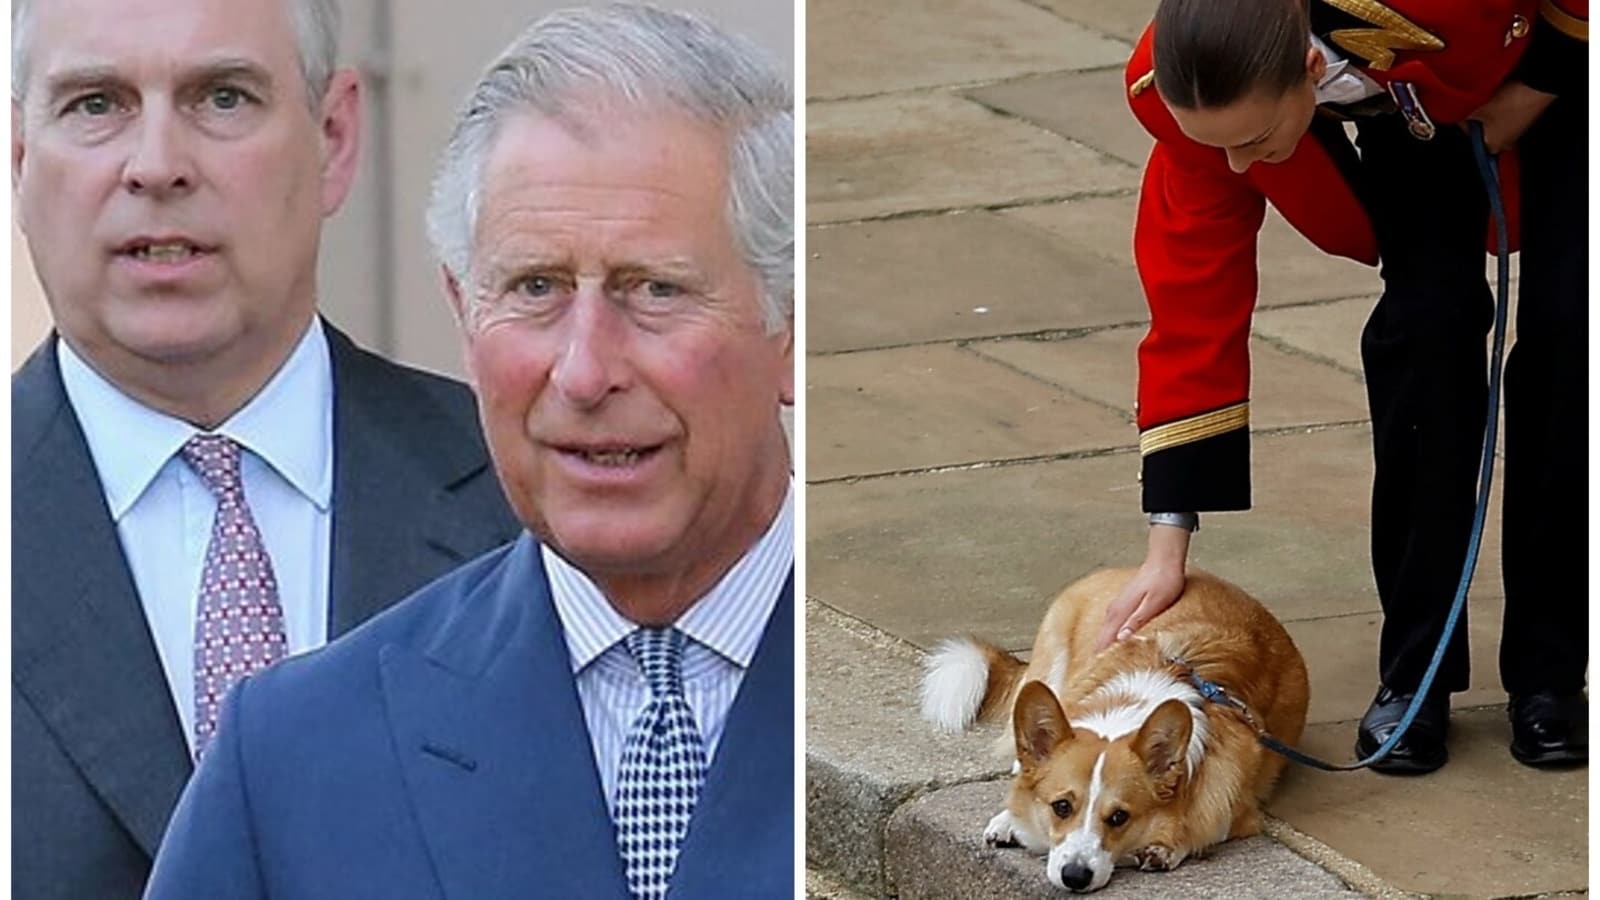 King Charles wants to throw out Queen Elizabeth's corgis and her favourite son Prince Andrew from Royal Lodge for…